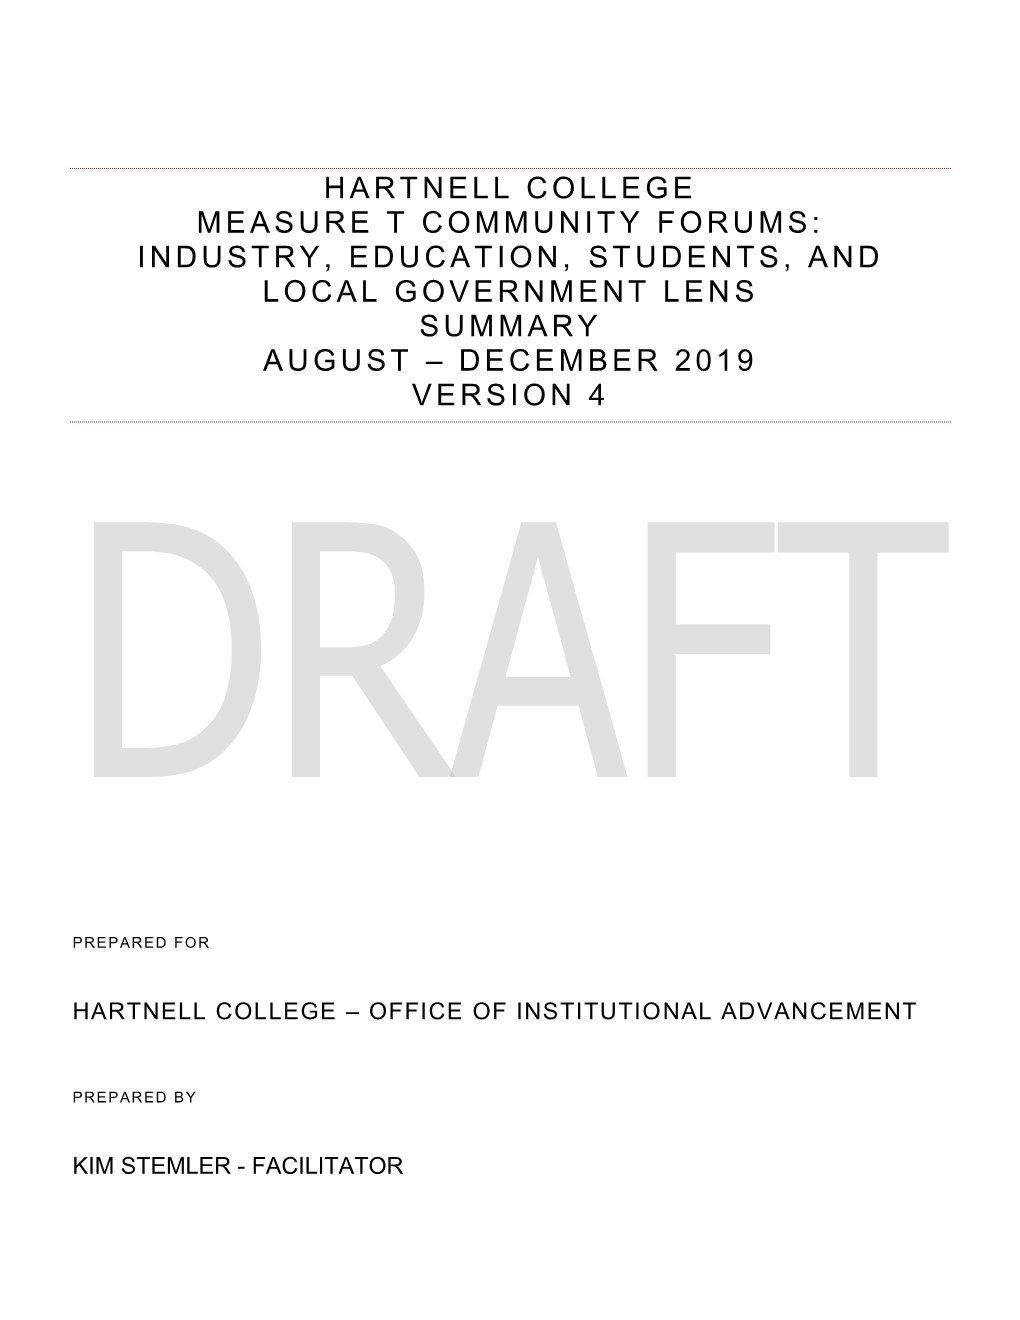 Hartnell College Measure T Community Forums: Industry, Education, Students, and Local Government Lens Summary August – DECEMBER 2019 Version 4